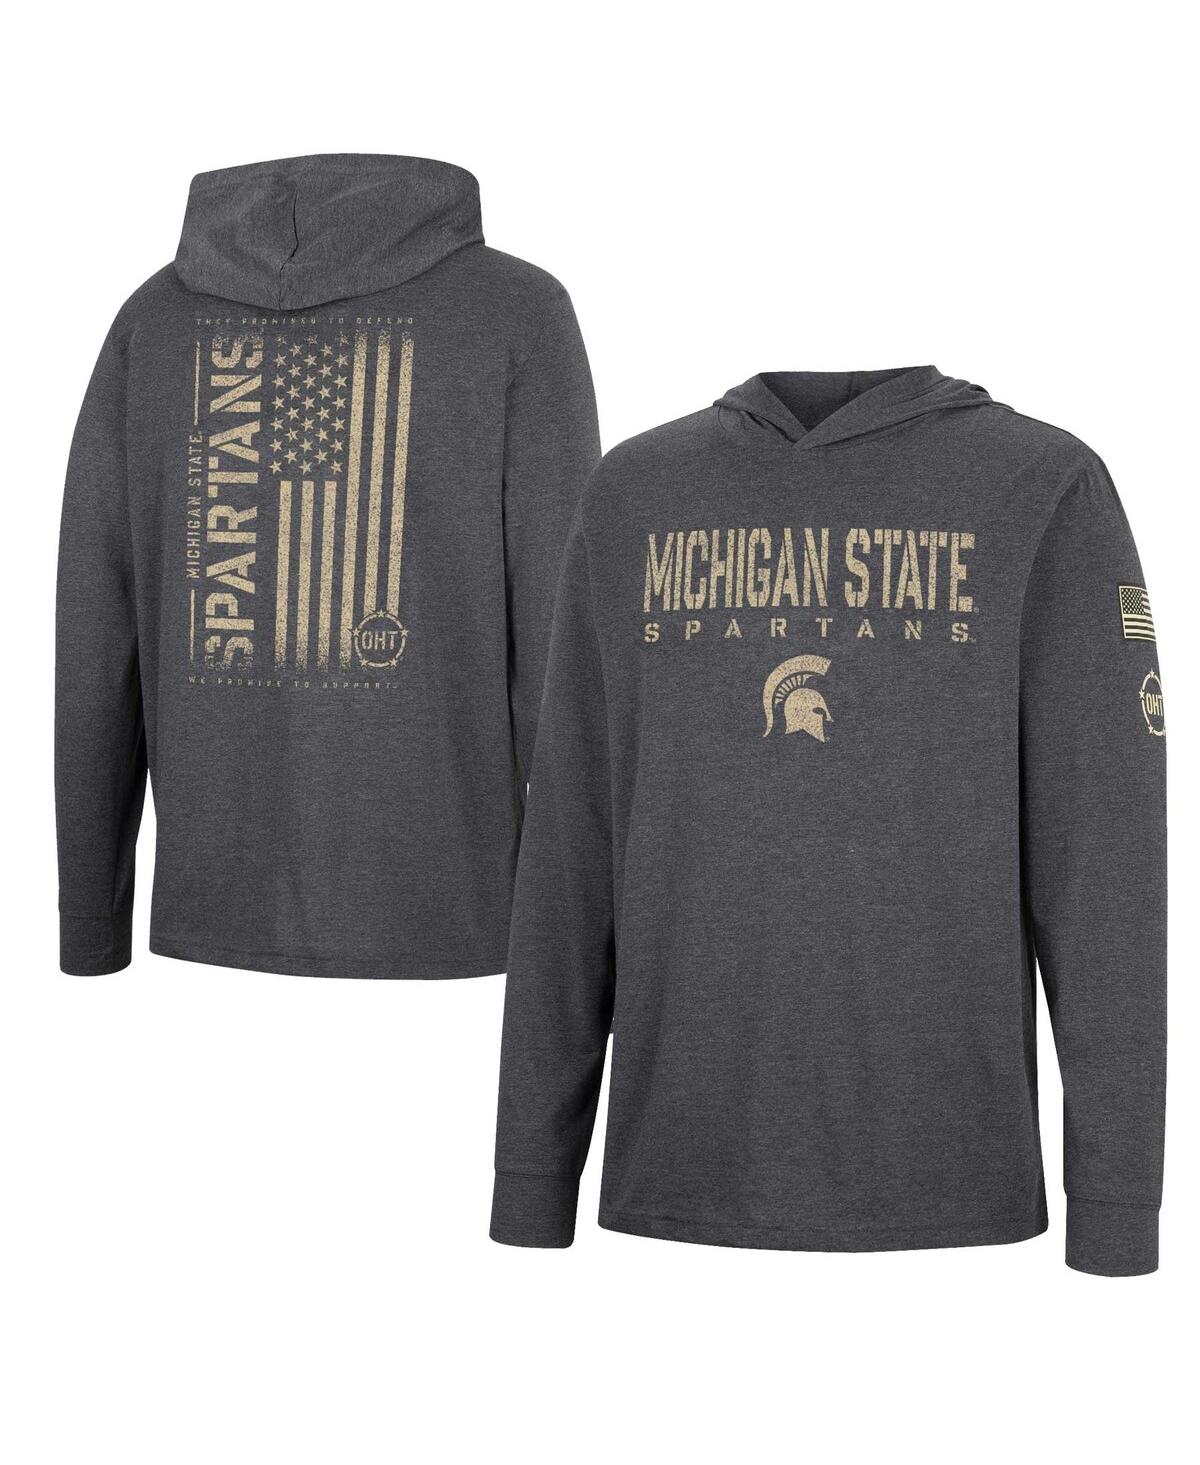 COLOSSEUM MEN'S COLOSSEUM CHARCOAL MICHIGAN STATE SPARTANS TEAM OHT MILITARY-INSPIRED APPRECIATION HOODIE LONG